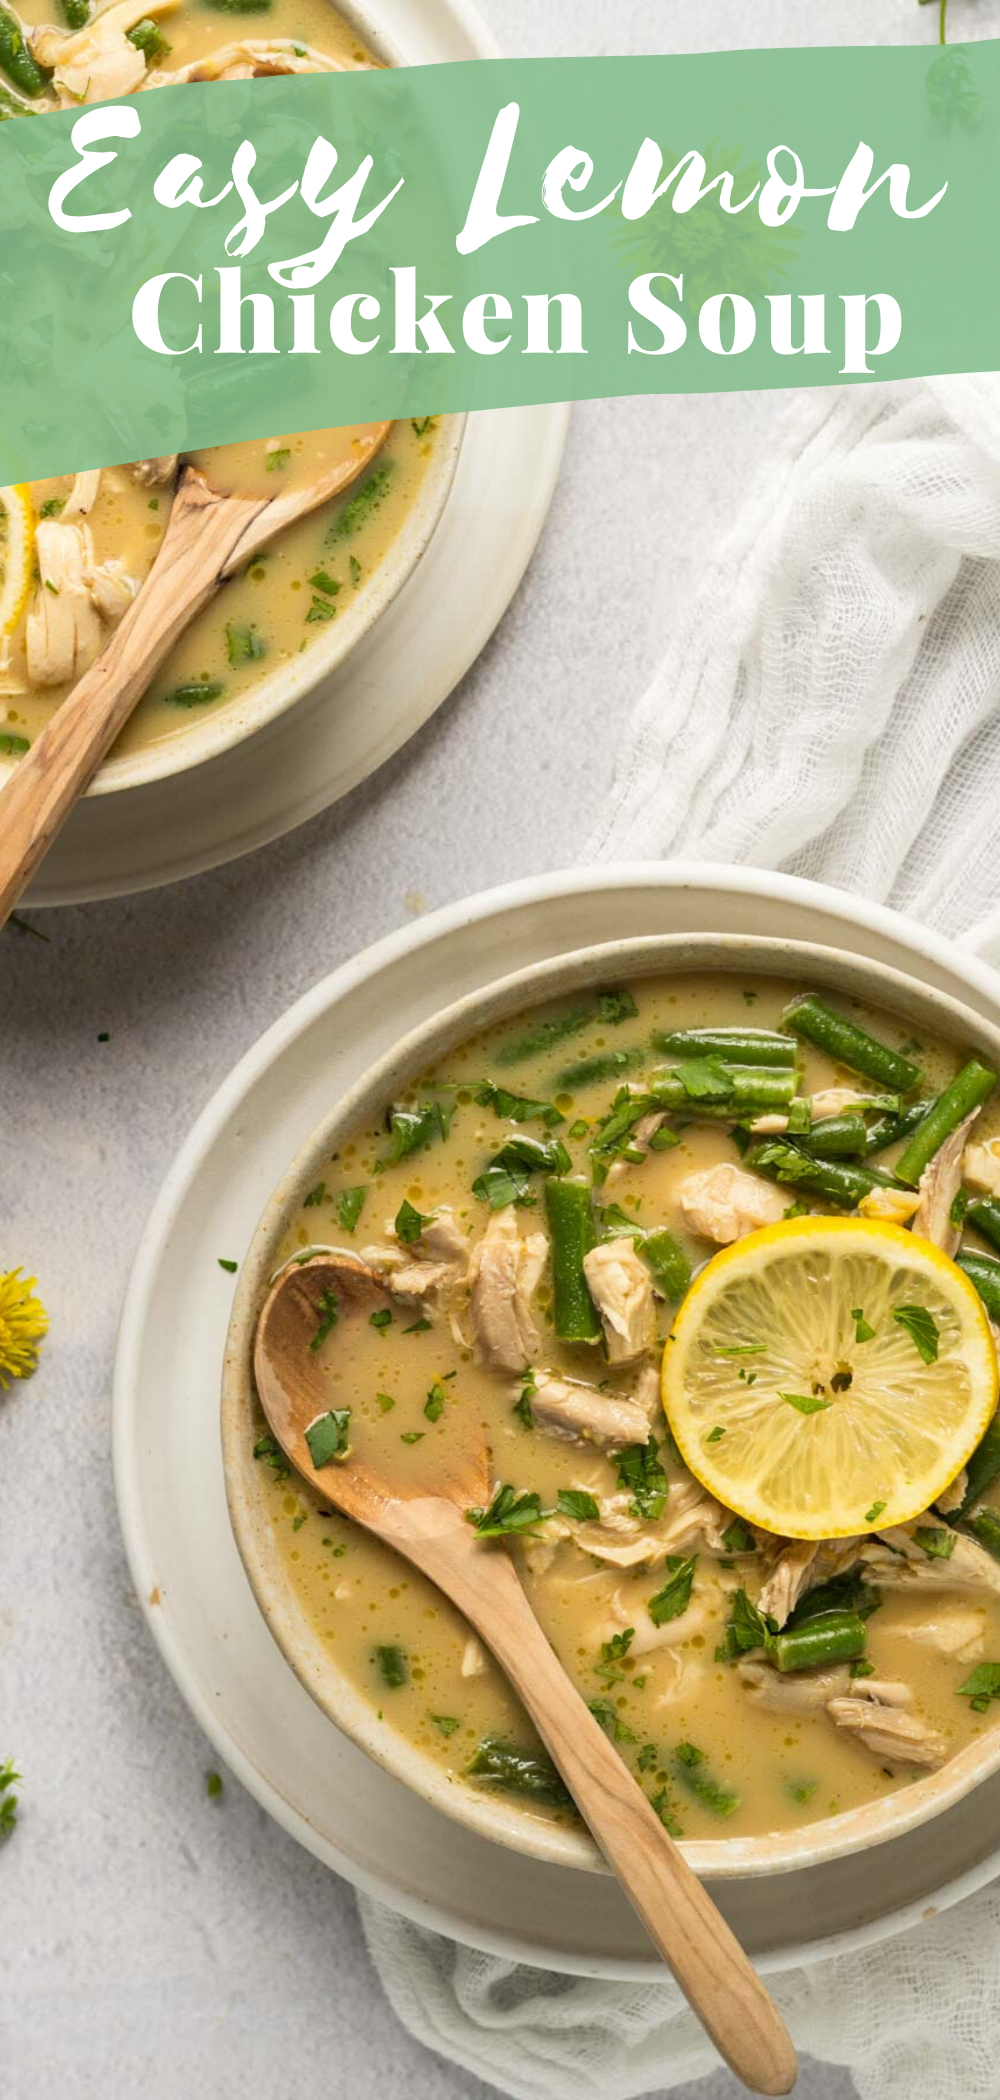 Avgolemeno soup (greek lemon chicken soup) is so easy and delicious! via @bessiebakes